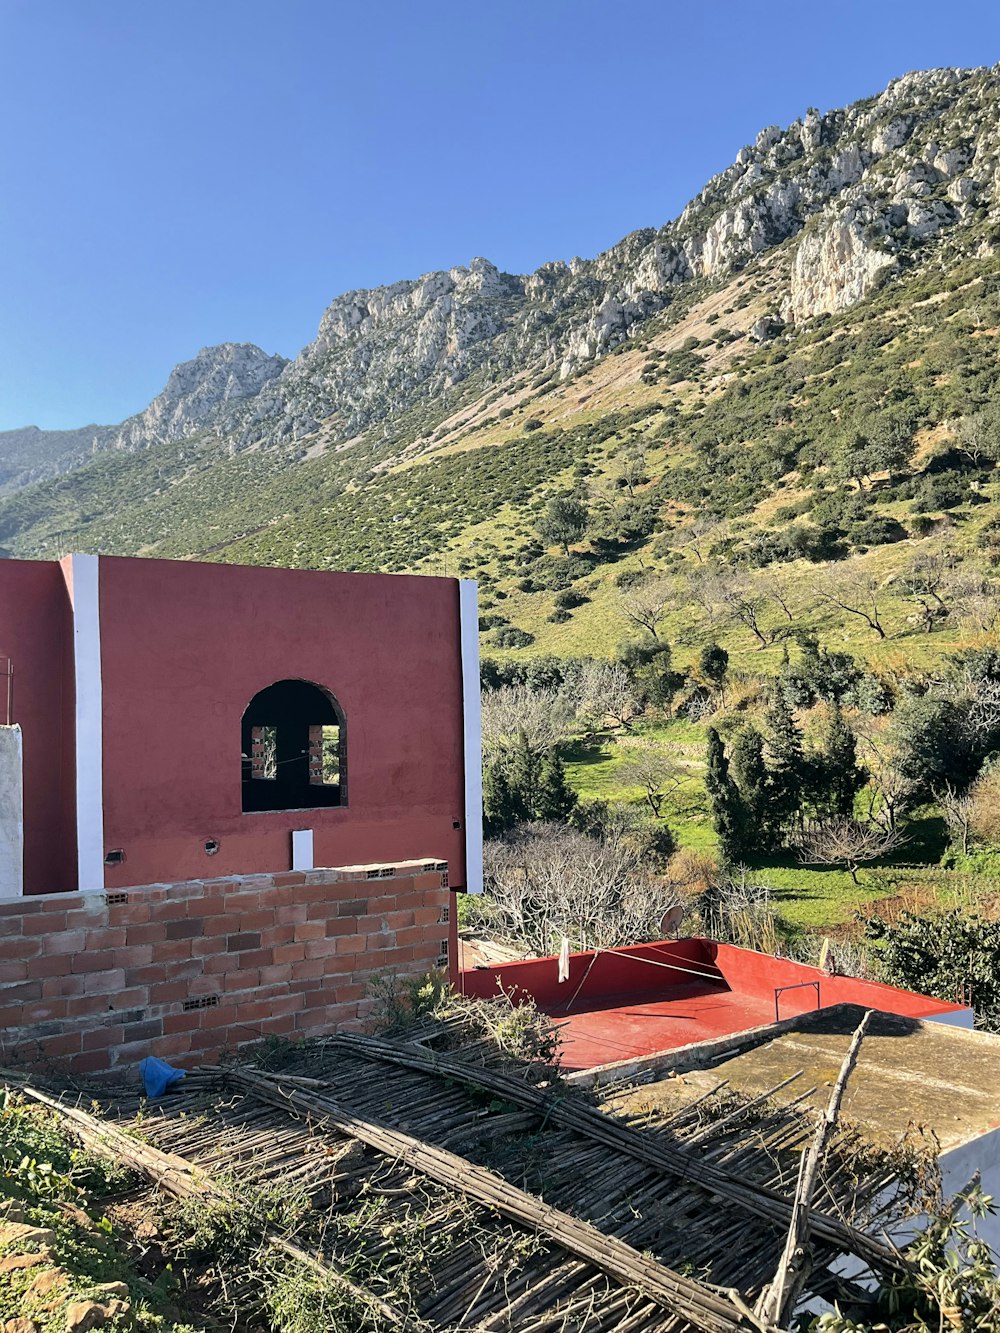 a red building with a window in the middle of a mountain